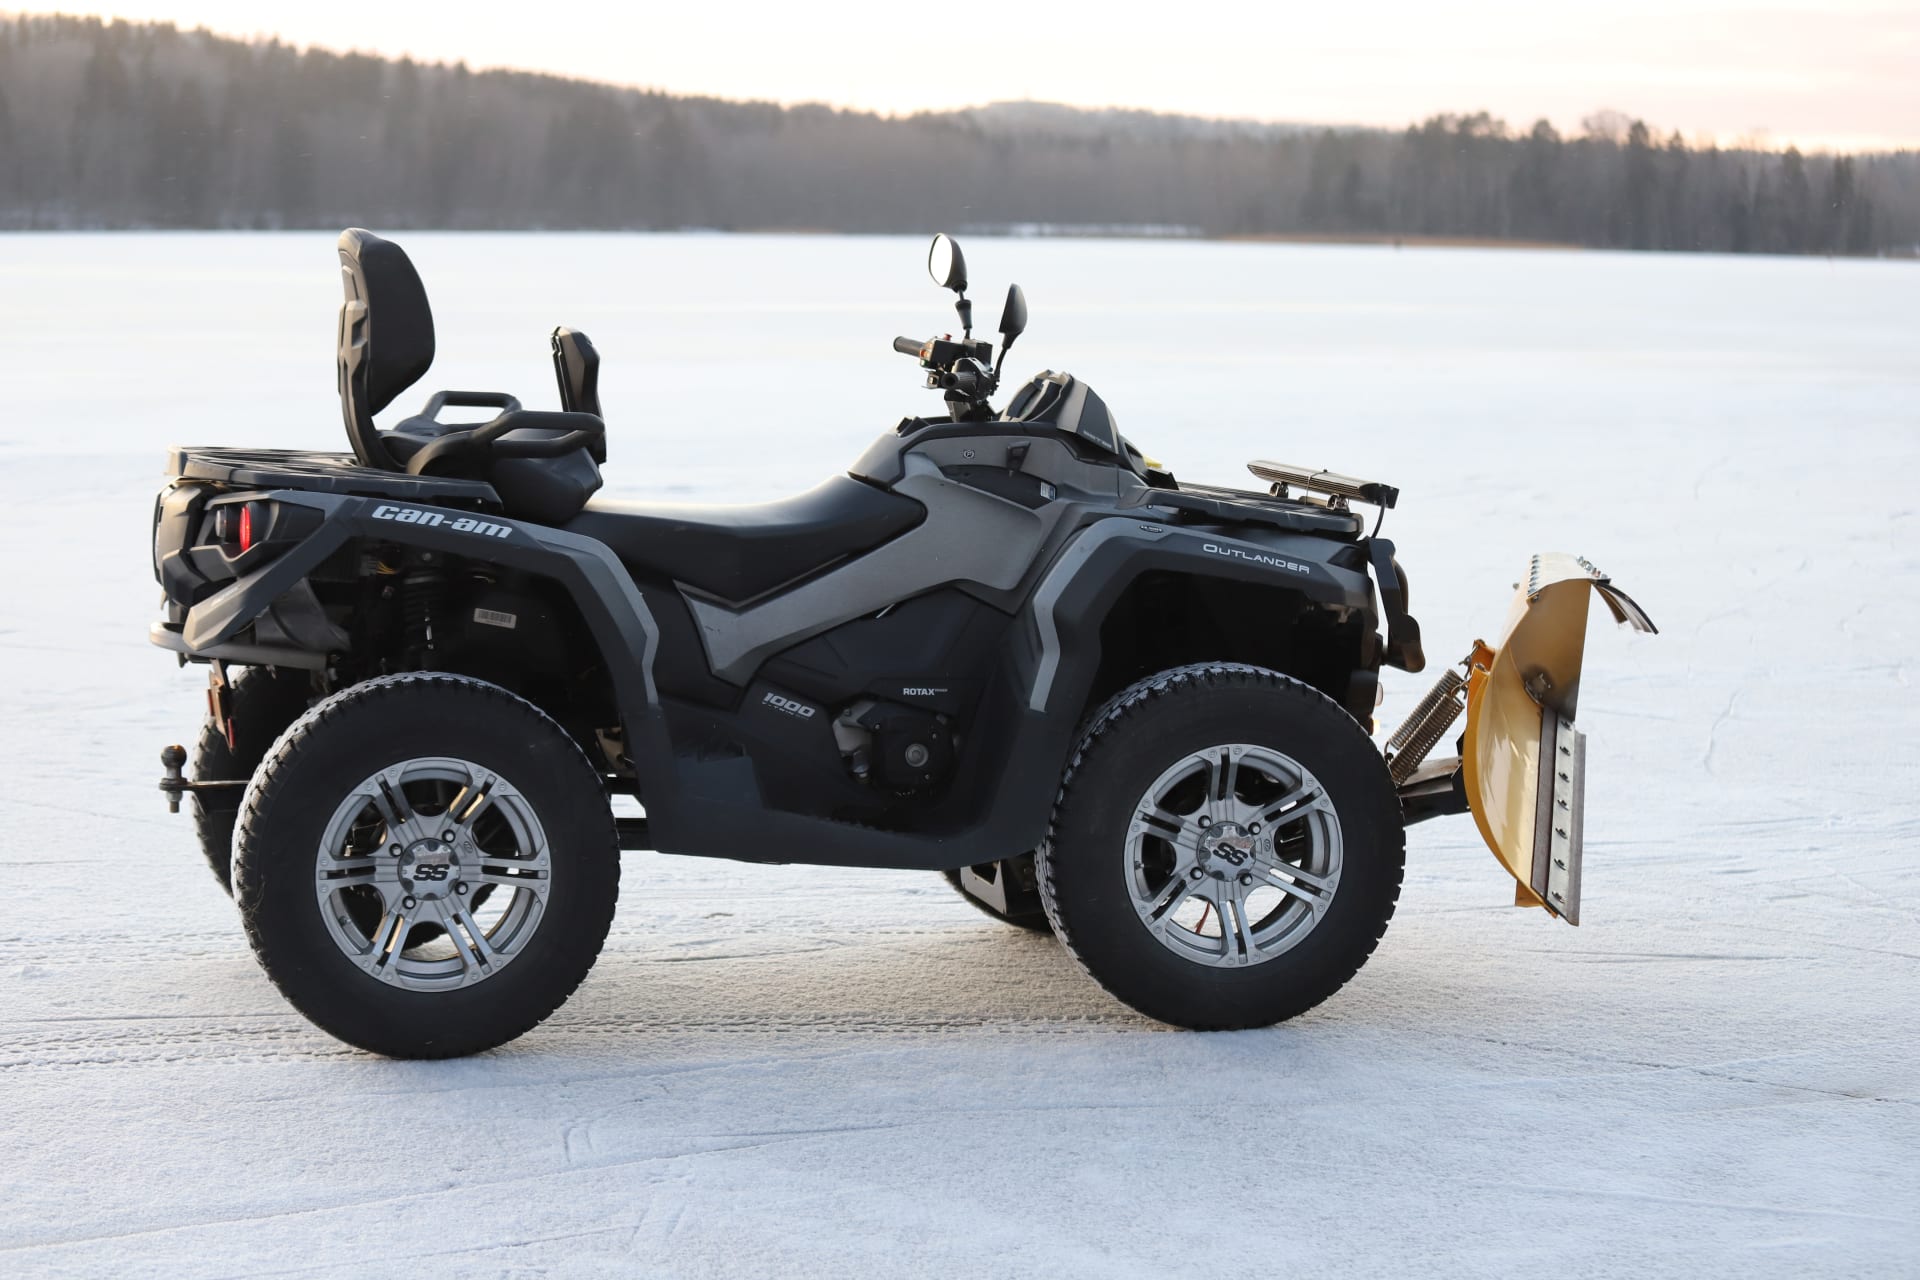 The most famous ATV in Tampere